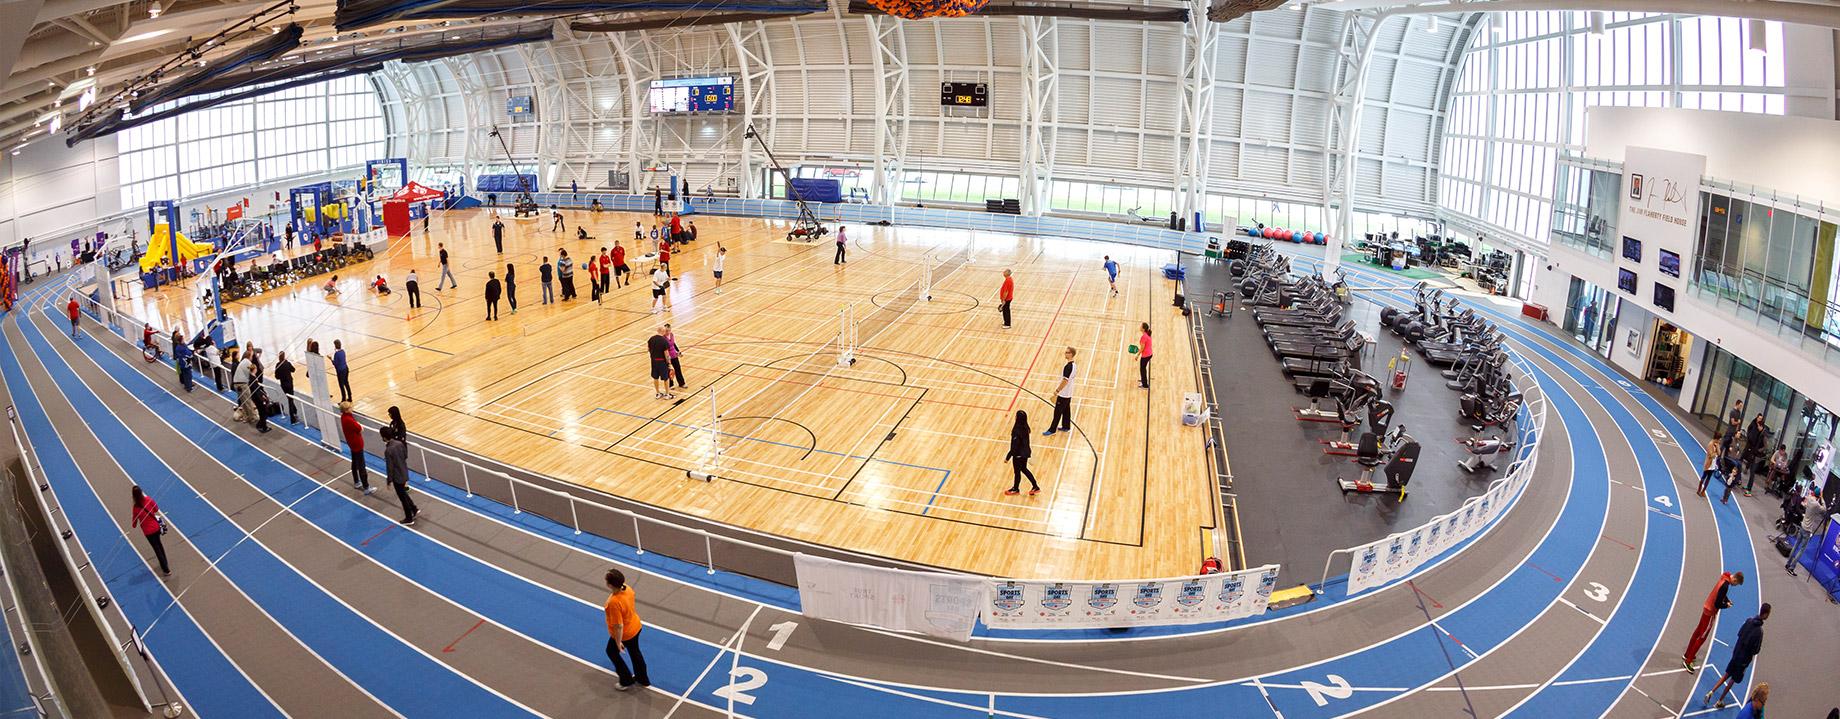 Image of Abilities Centre facility including track with exercise equipment and basketball court.